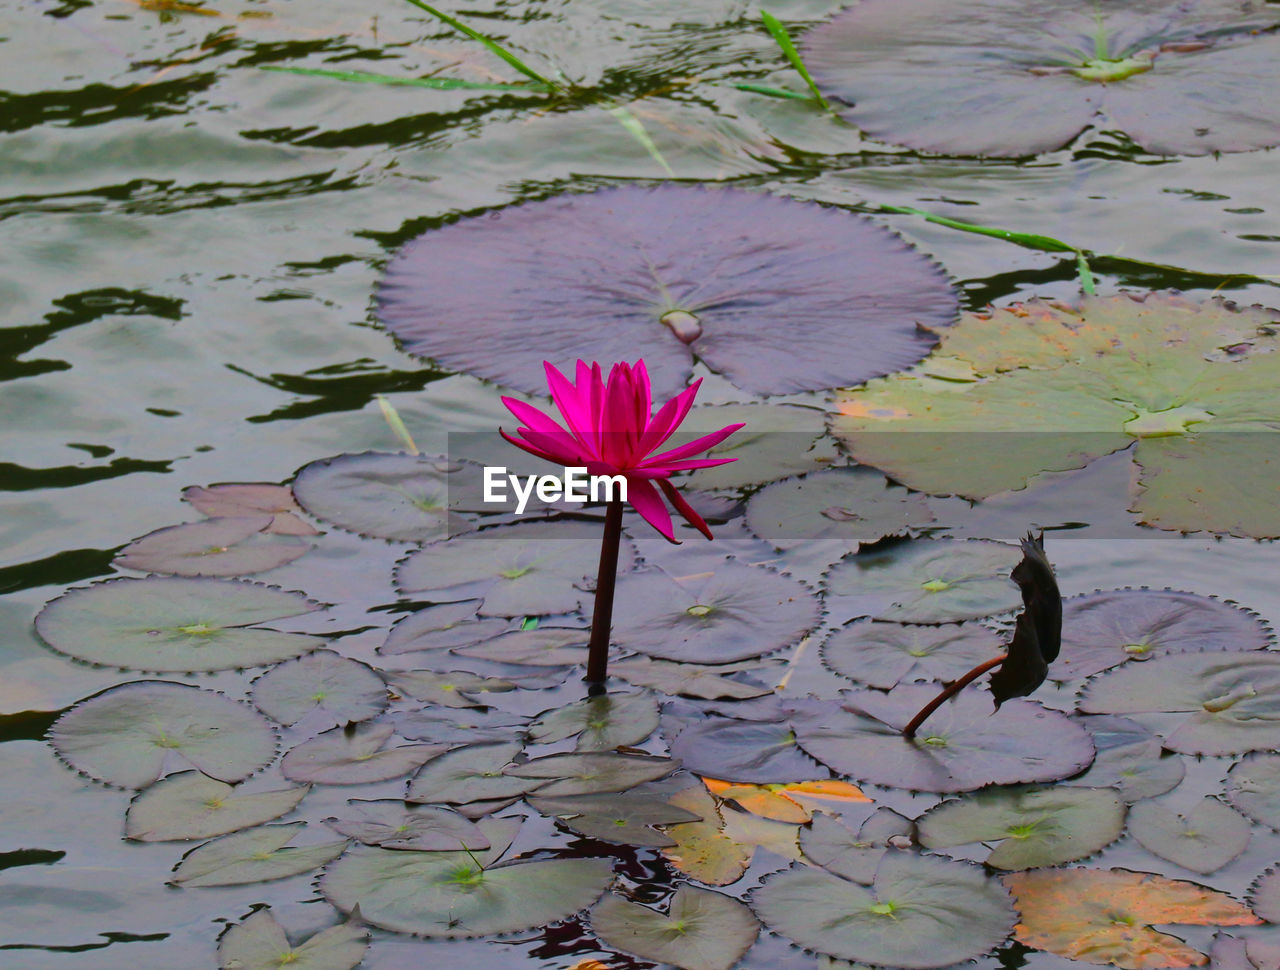 flower, water lily, flowering plant, water, plant, lake, beauty in nature, nature, floating, freshness, lily, floating on water, pink, leaf, lotus water lily, petal, plant part, no people, fragility, close-up, inflorescence, flower head, day, high angle view, outdoors, growth, reflection, botany